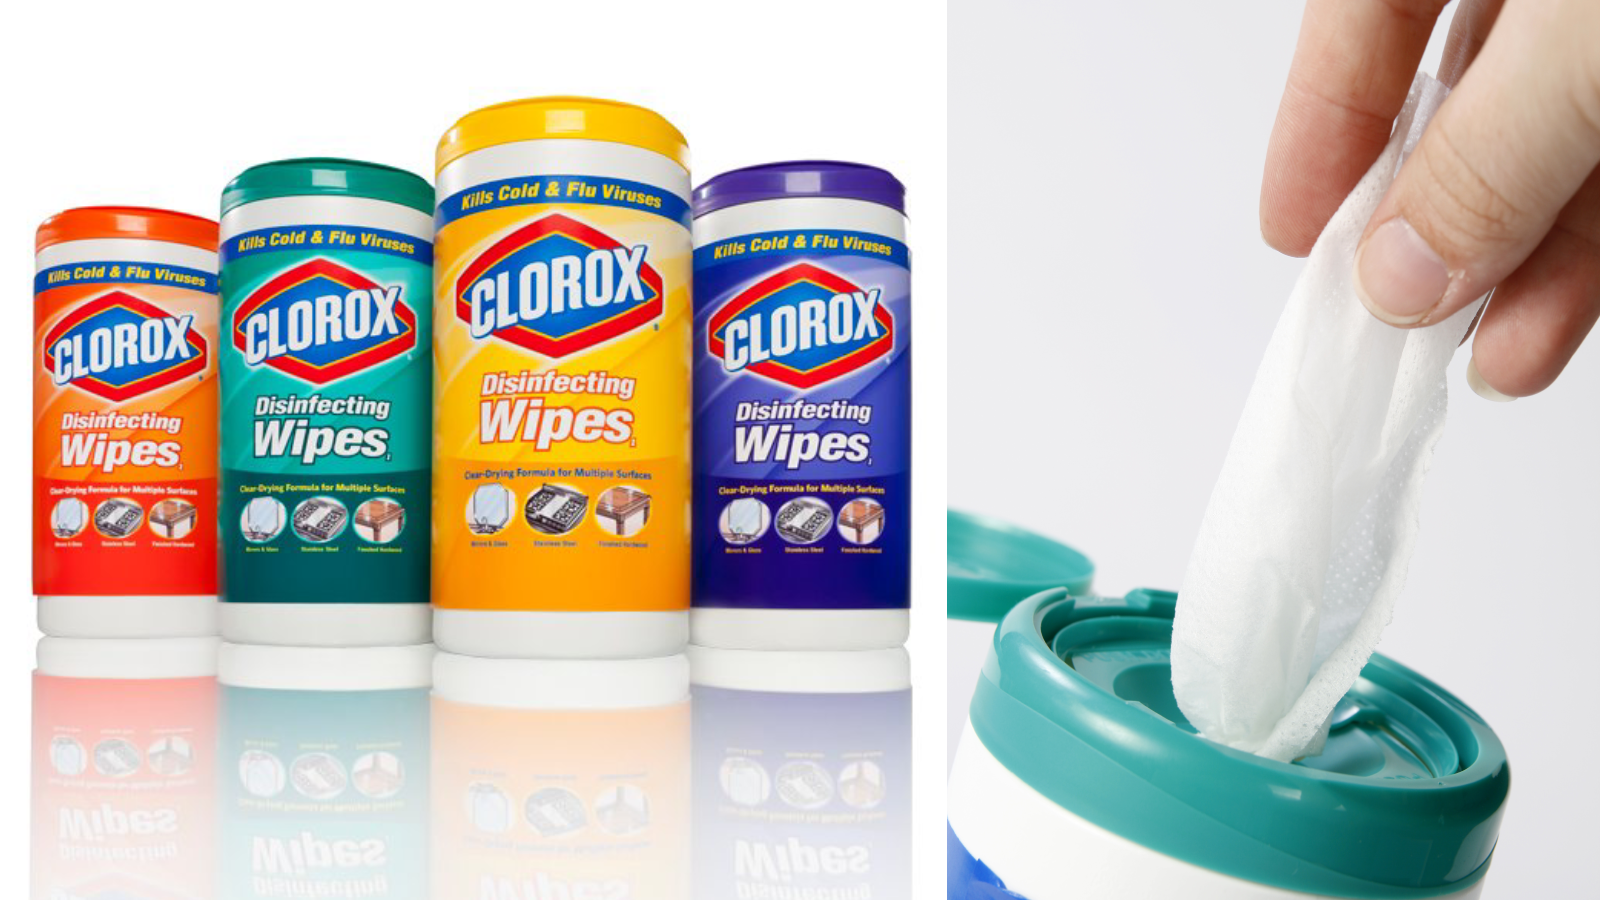 Here's where to buy cleaning wipes